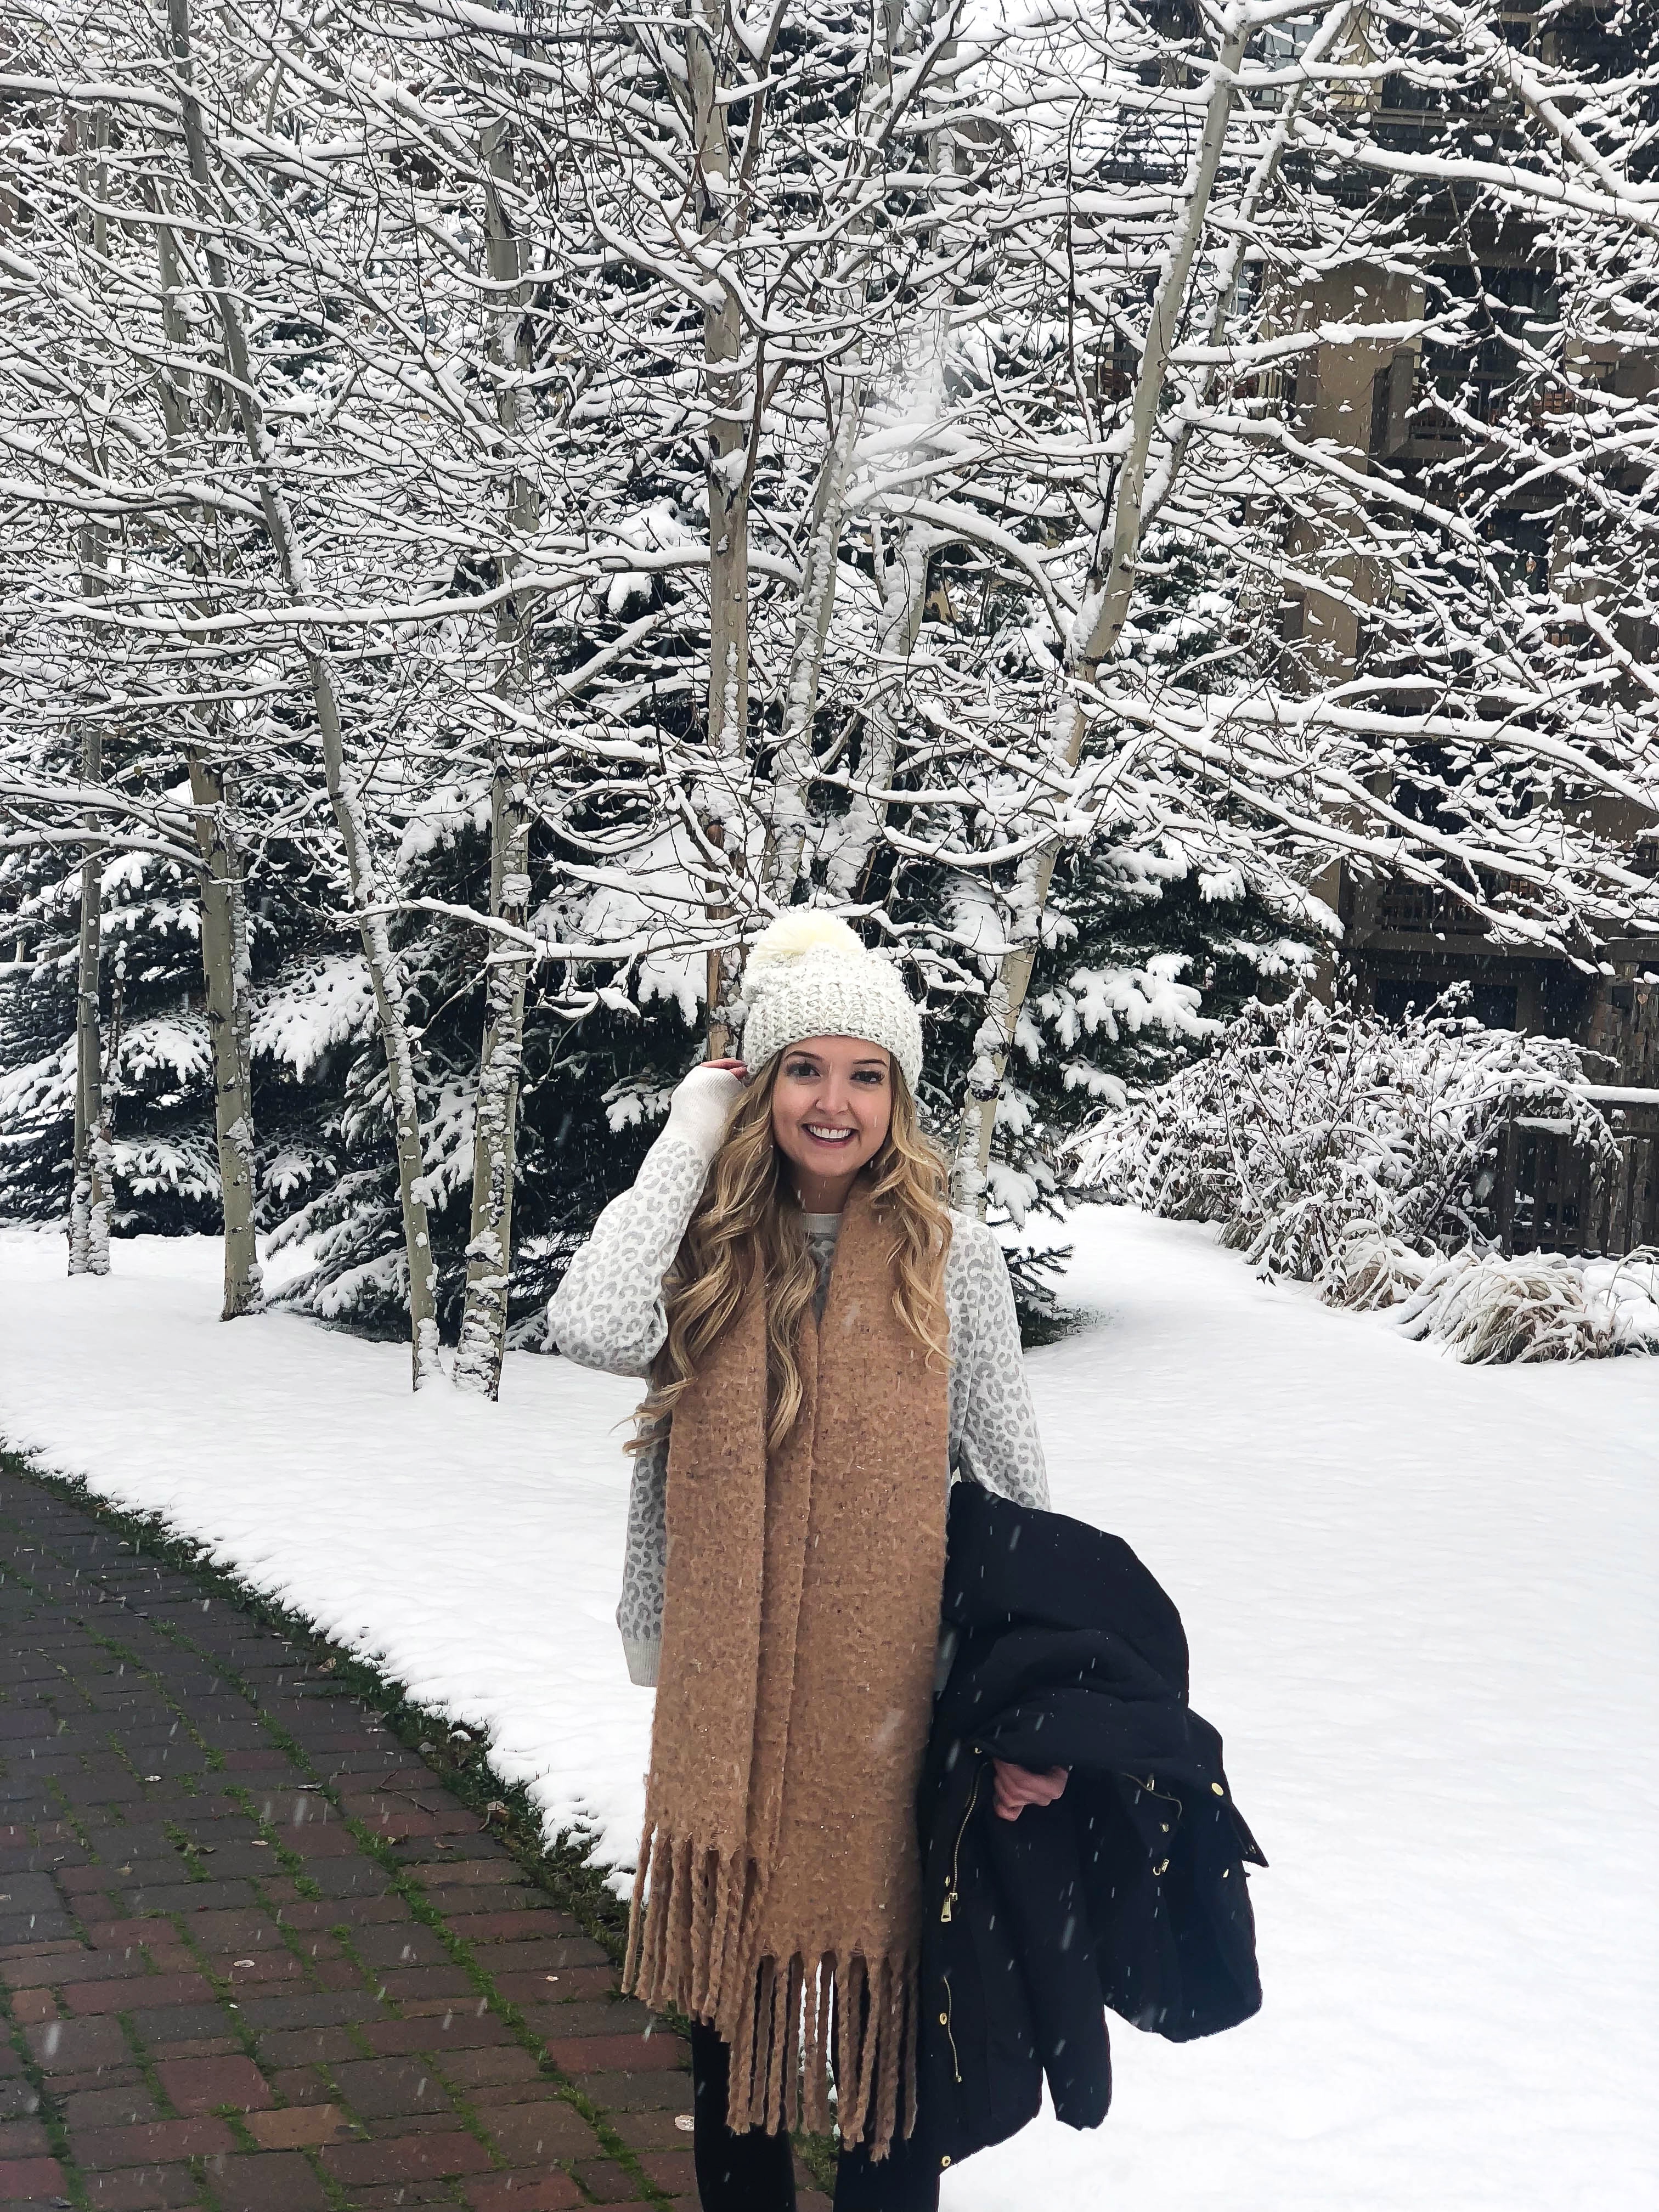 What I wore in Vail! Went to Vail, Colorado last weekend for a wedding so I wanted to share my everyday Colorado outfits and my wedding arrive! We went in November and it was beautiful and snowy! Details on fashion blog daily dos of charm by lauren lindmark